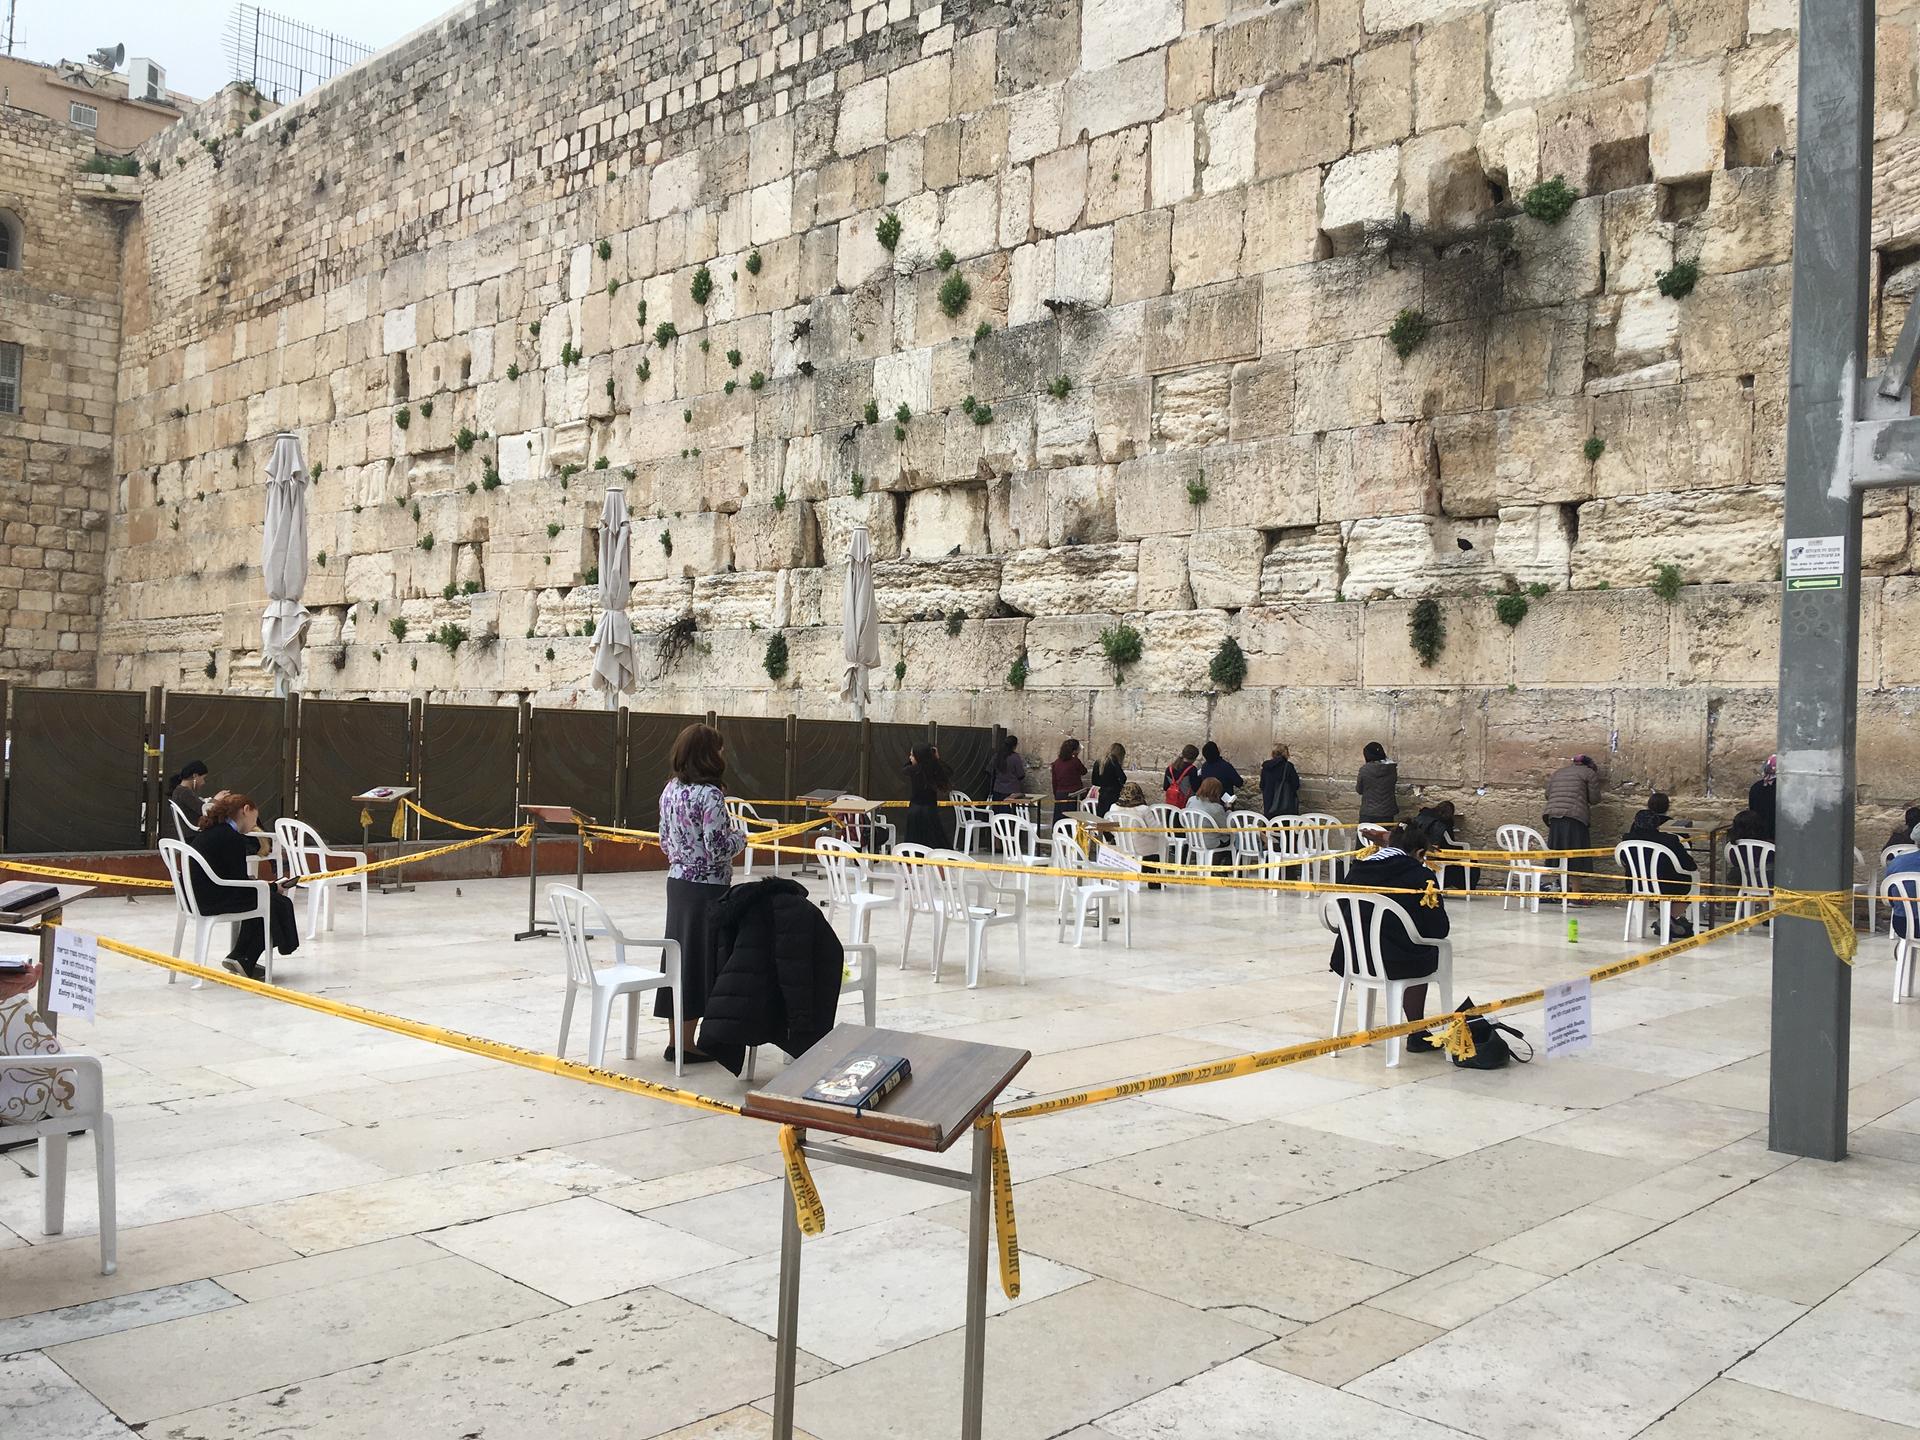 At the Western Wall, prayer is cordoned into sections. Only 10 people at a time may worship in each subsection.